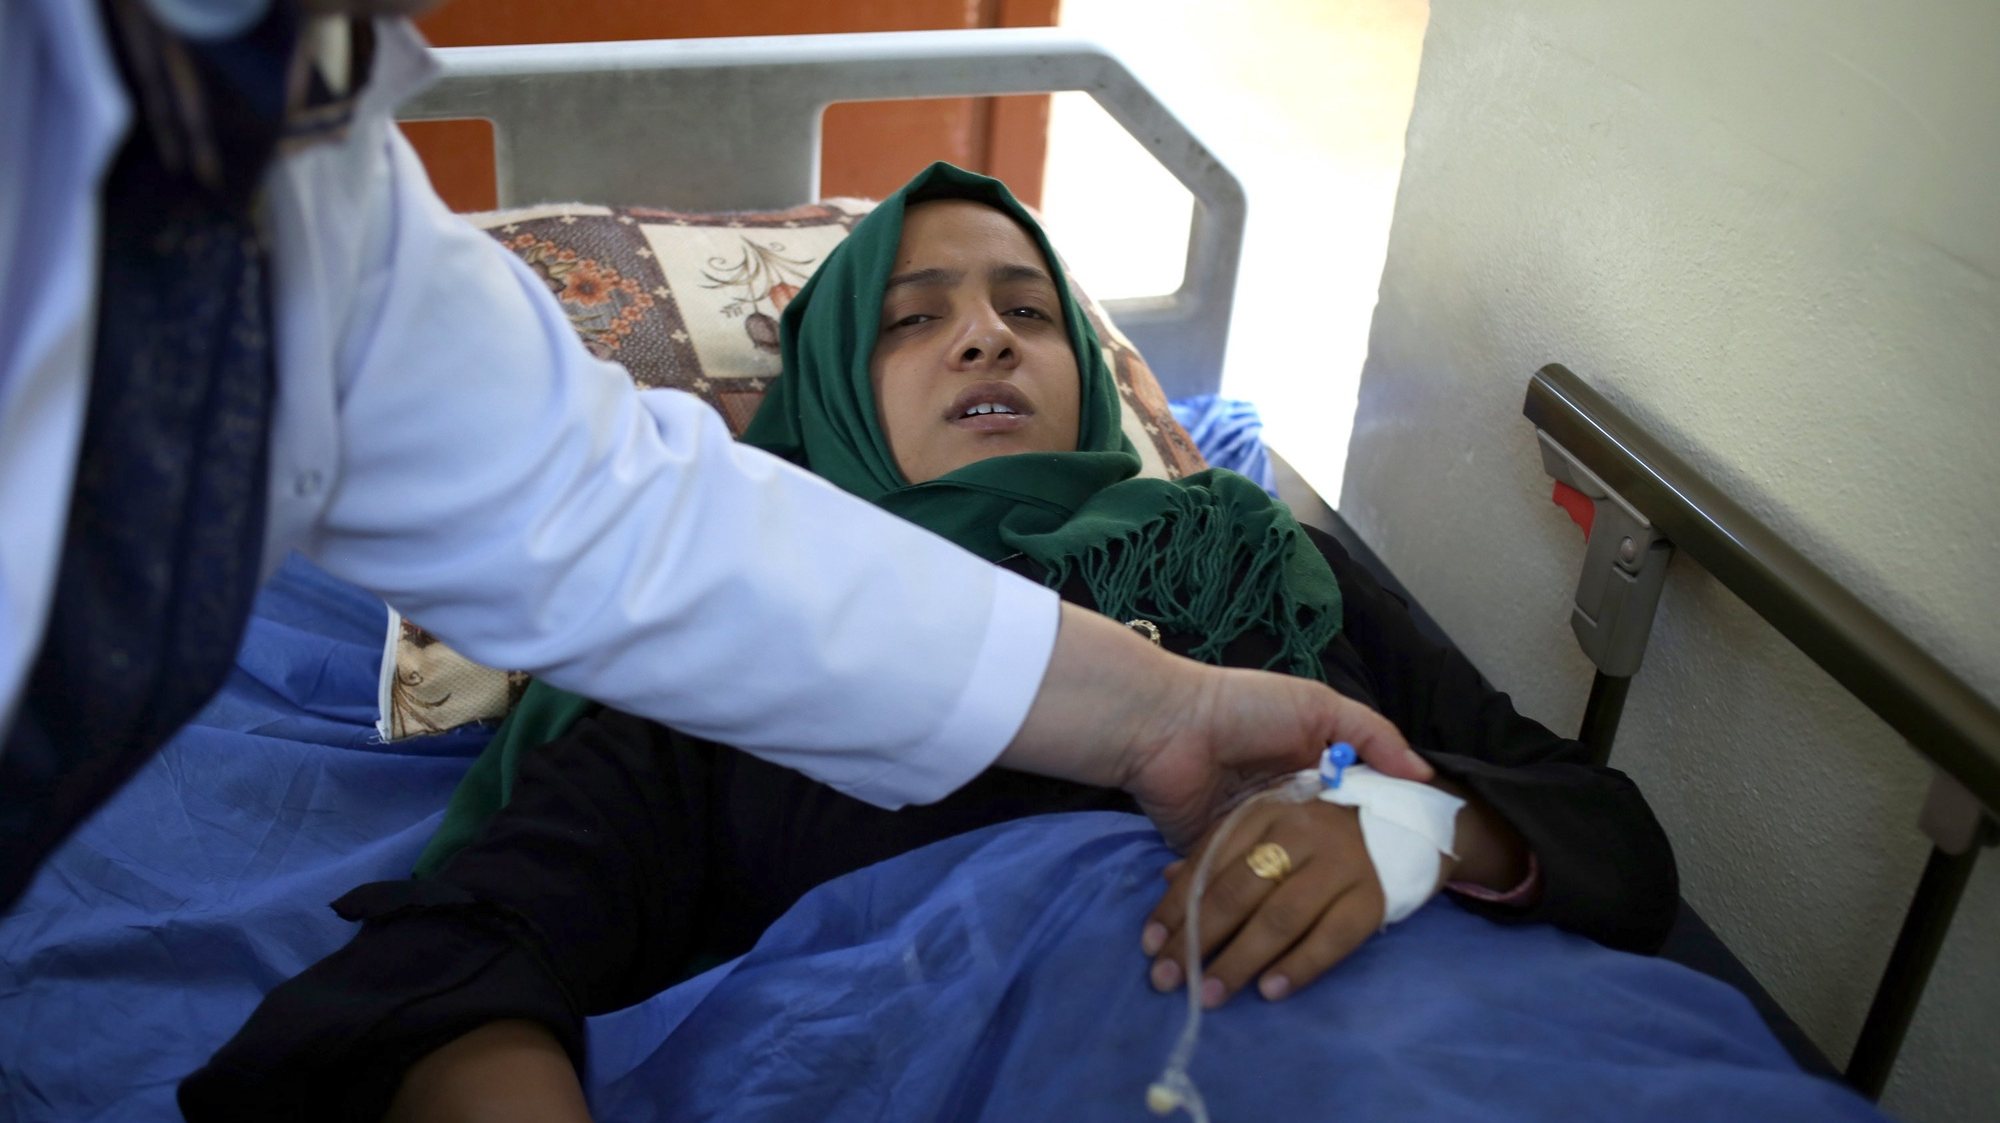 epa06026141 An Iraqi woman receives a medical treatment at a hospital in Erbil, northern Iraq, 13 June 2017. Media reports state that three displaced people died following an outbreak of food poisoning at a refugee camp near the northern Iraq city of Mosul and hundreds more are in a critical condition. The victims died following Ramadan fast with an iftar meal provided by a non-governmental organisation on 12 June. Another 800 to 900 people are being treated for symptons of food poisoning in Khazir camp for displaced people from Mosul.  EPA/GAILAN HAJI